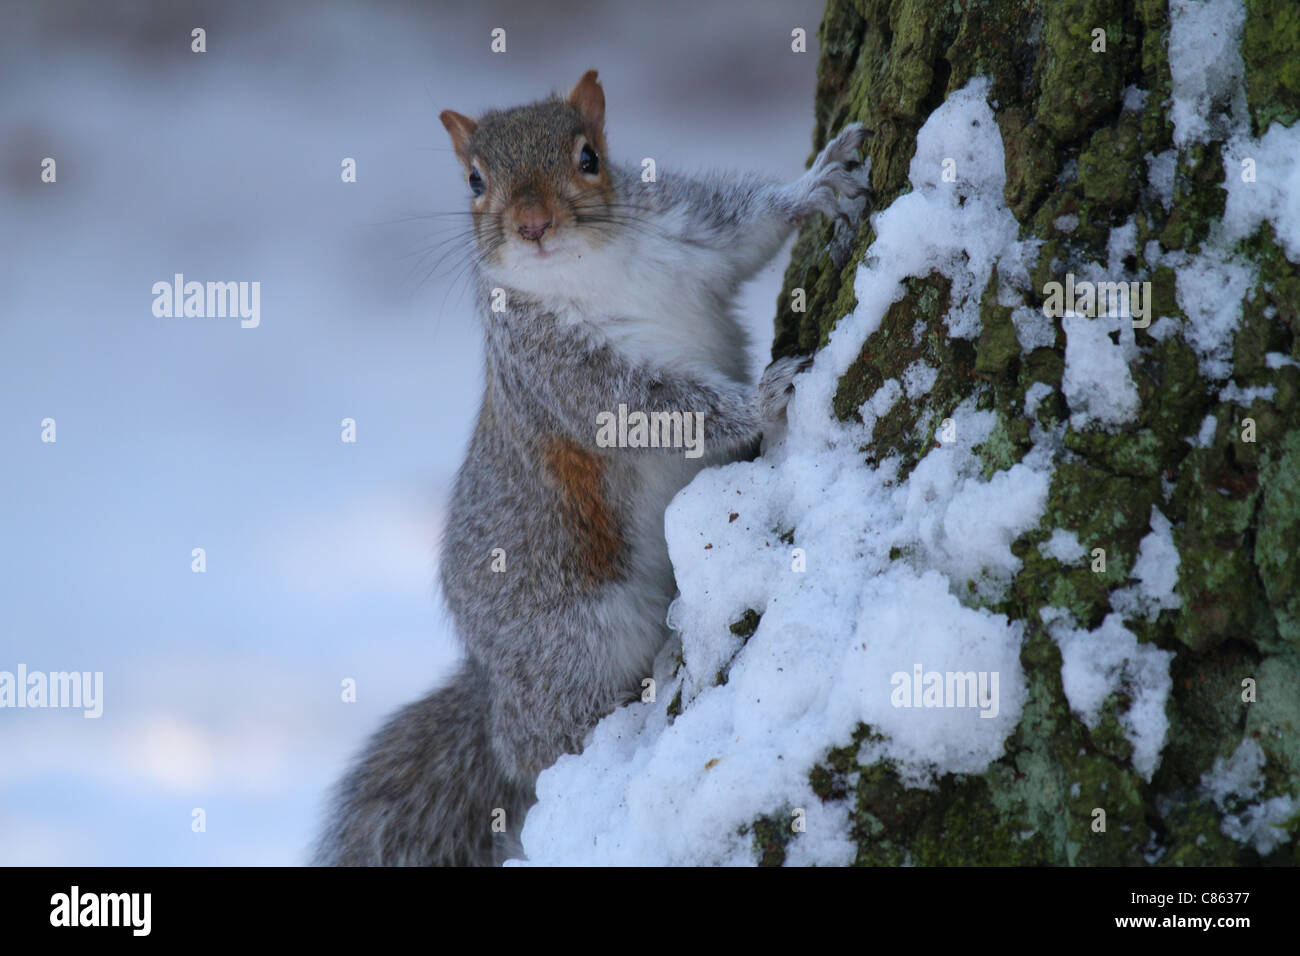 a gray squirrel in the UK winter snow Stock Photo